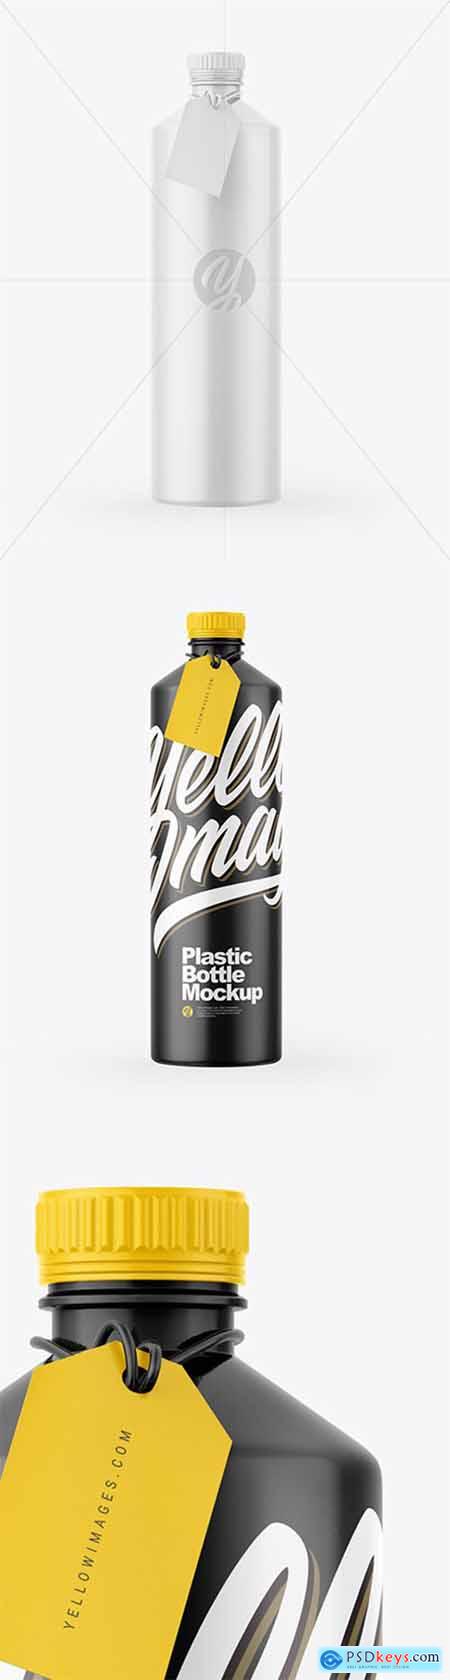 Plastic Bottle Mockup Psd Free Download Download Free And Premium Psd Mockup Templates And Design Assets